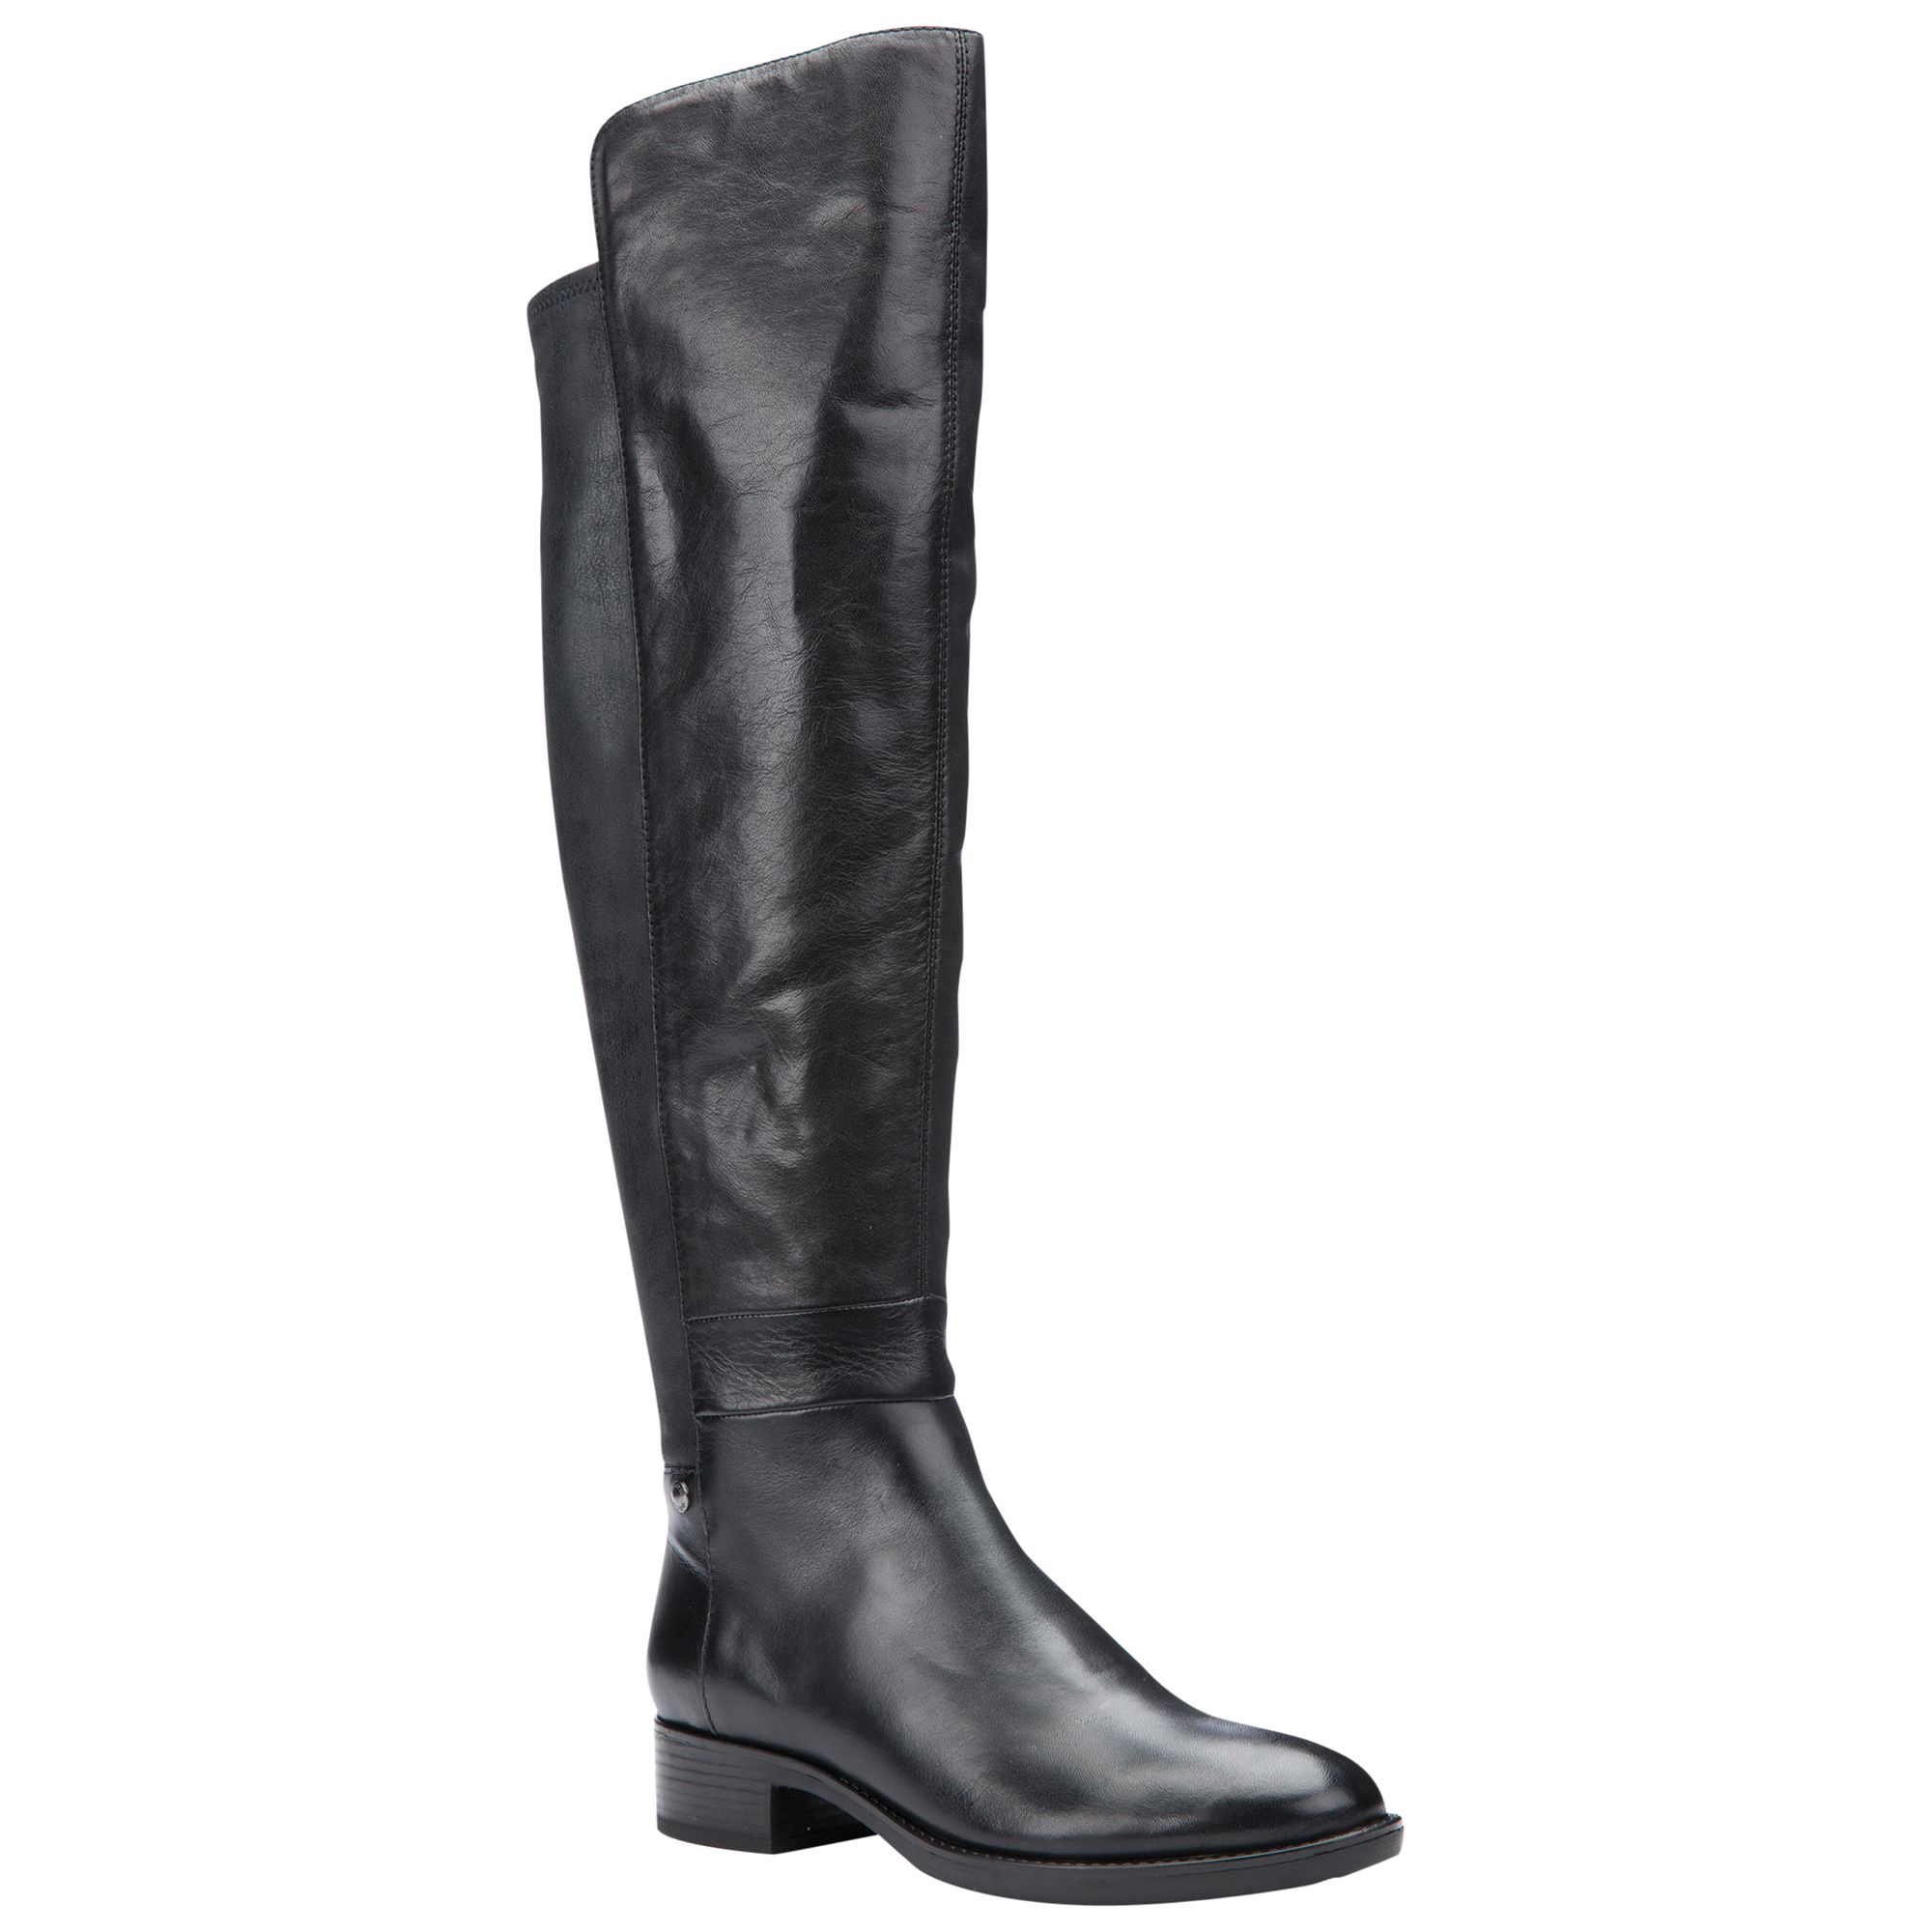 Geox Felicity J Block Heeled Over the Knee Boots at John Lewis & Partners